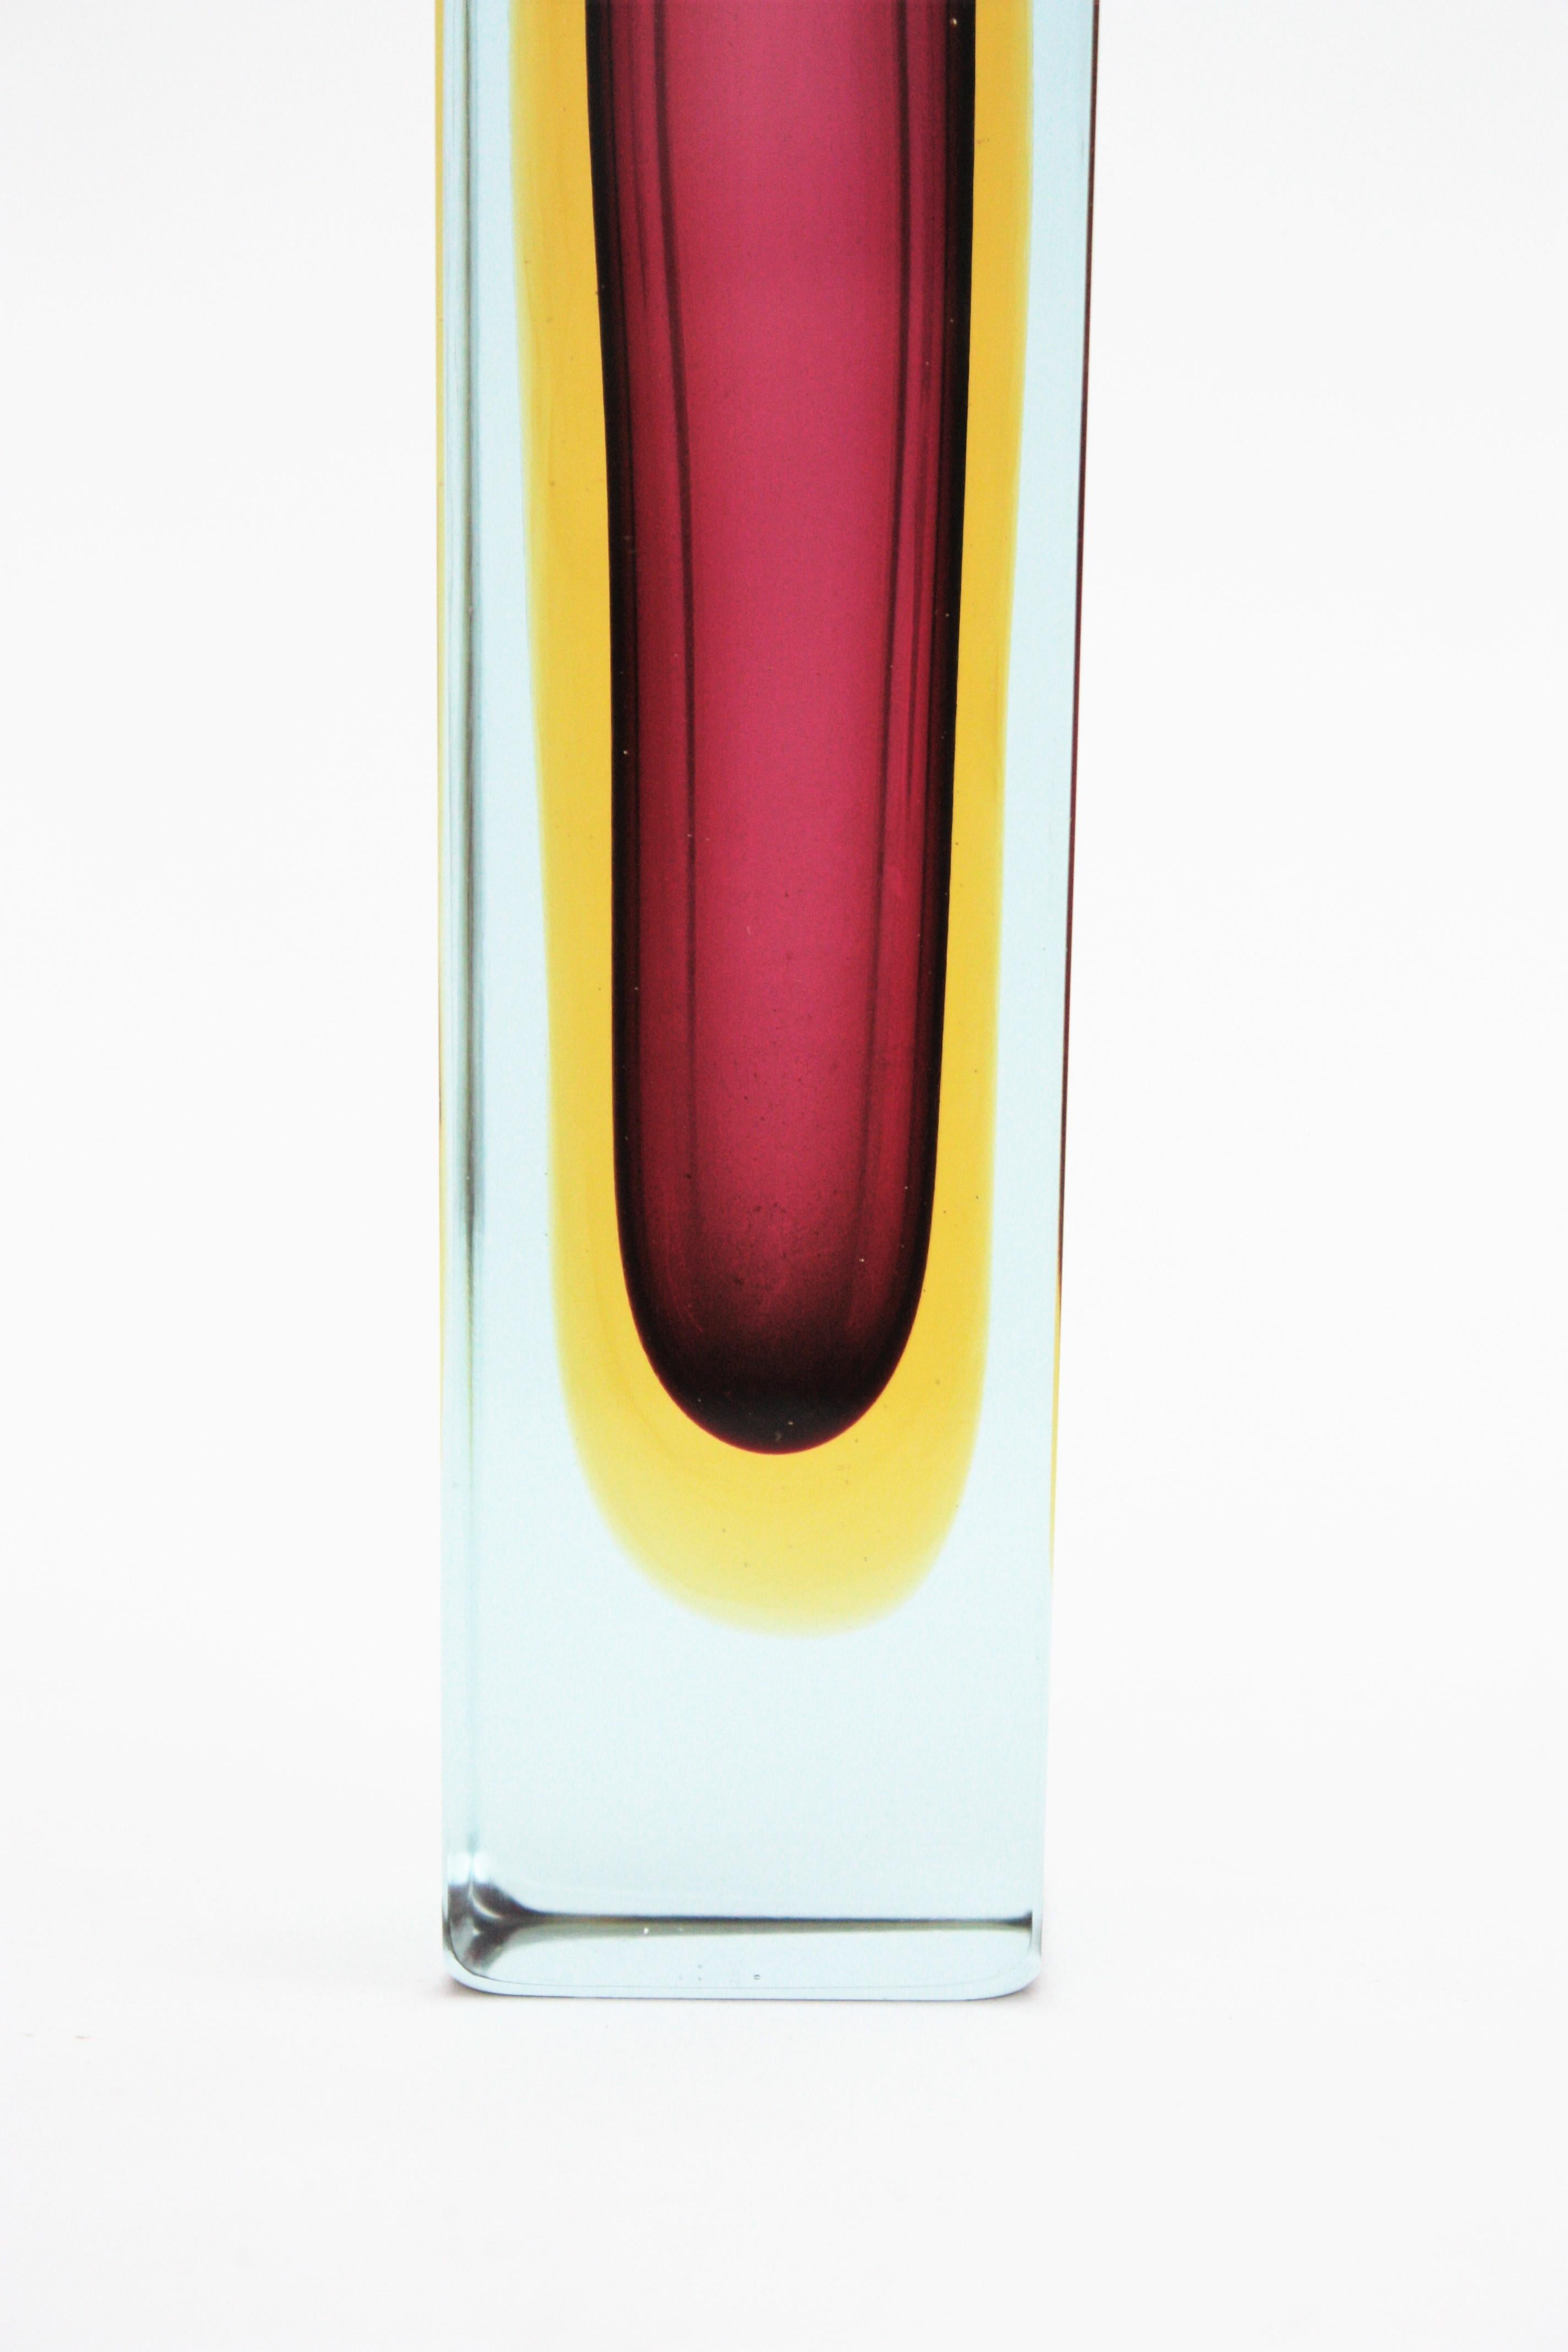 20th Century Flavio Poli Murano Sommerso Purple and Yellow Faceted Art Glass Vase For Sale